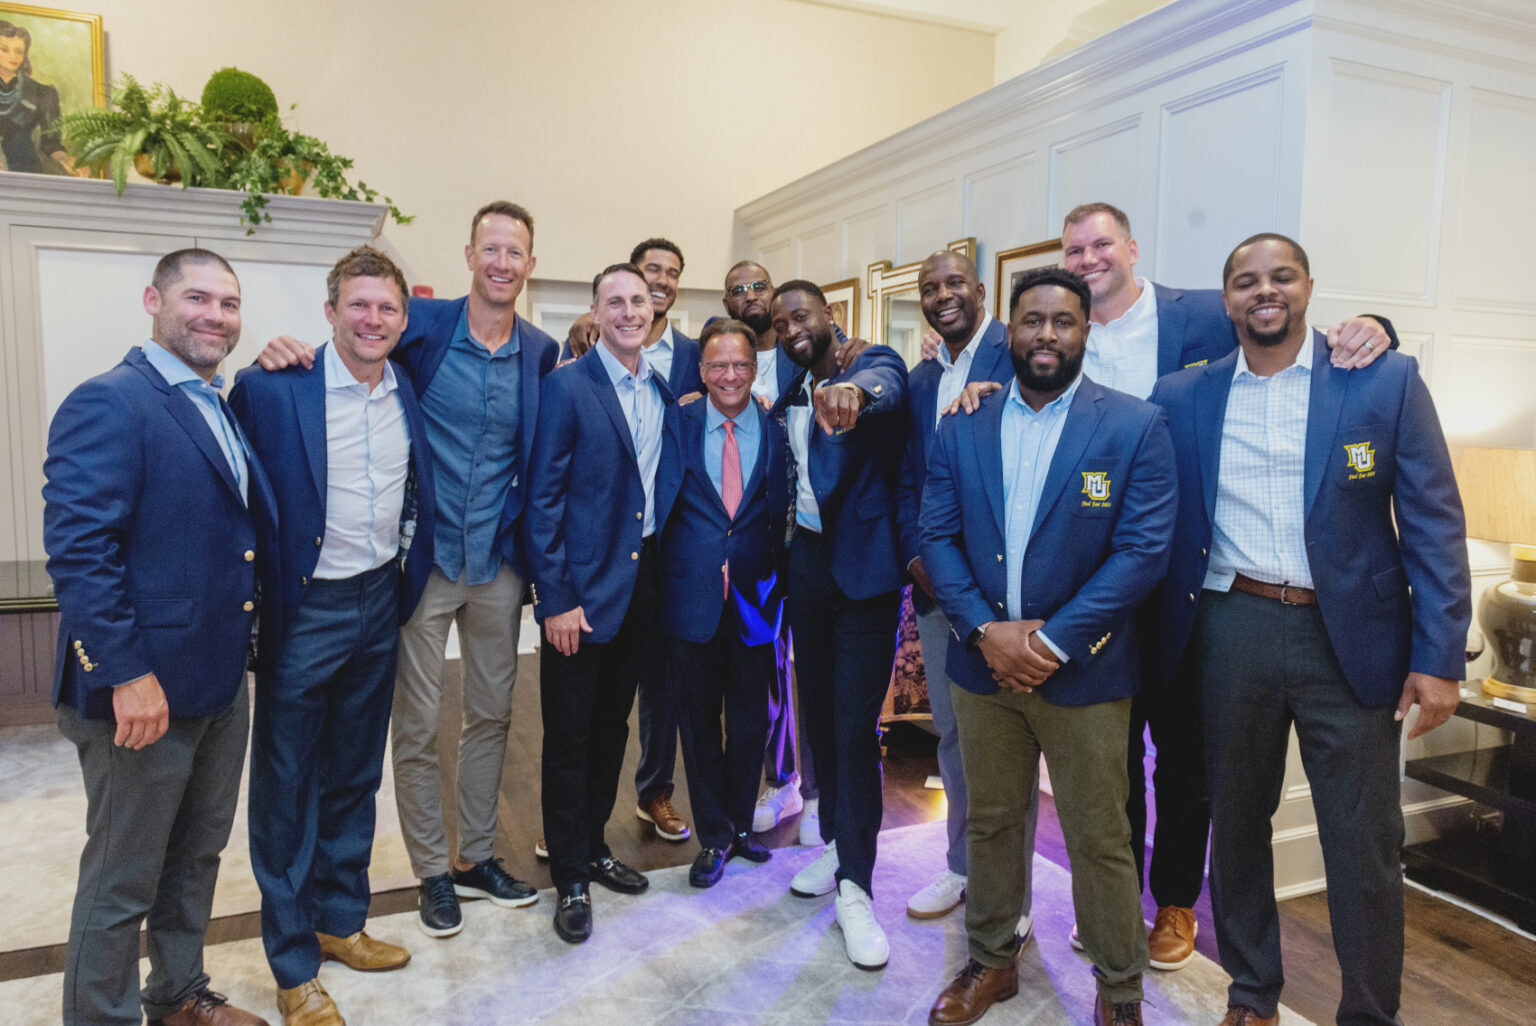 Photo gallery 20th anniversary celebration of Men's Basketball's Final